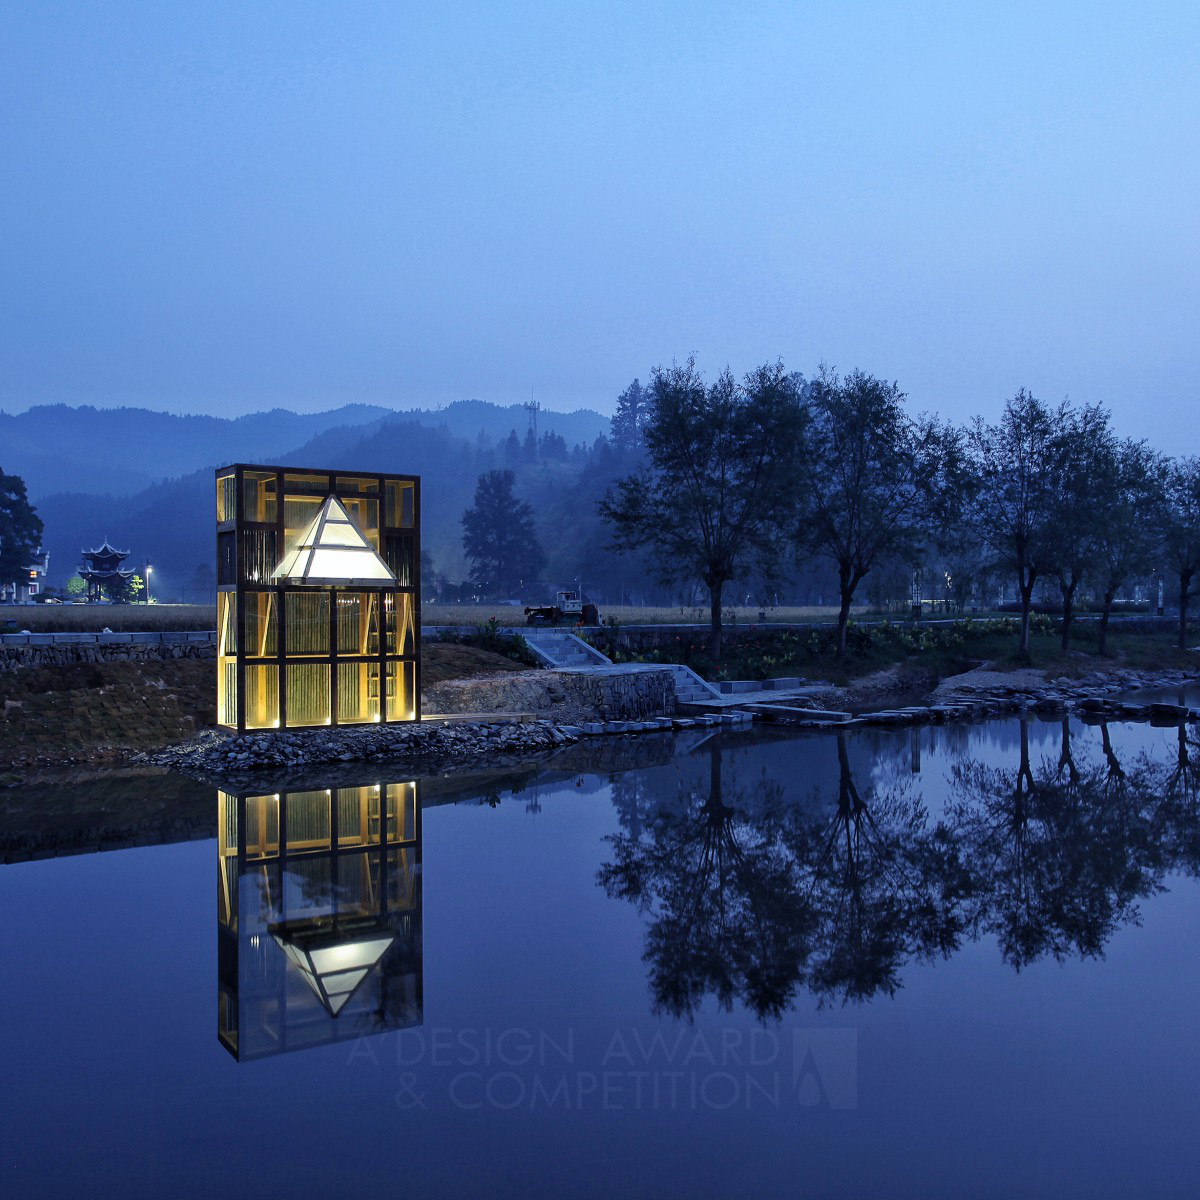 mirrored sight shelter <b>viewing house, tea house